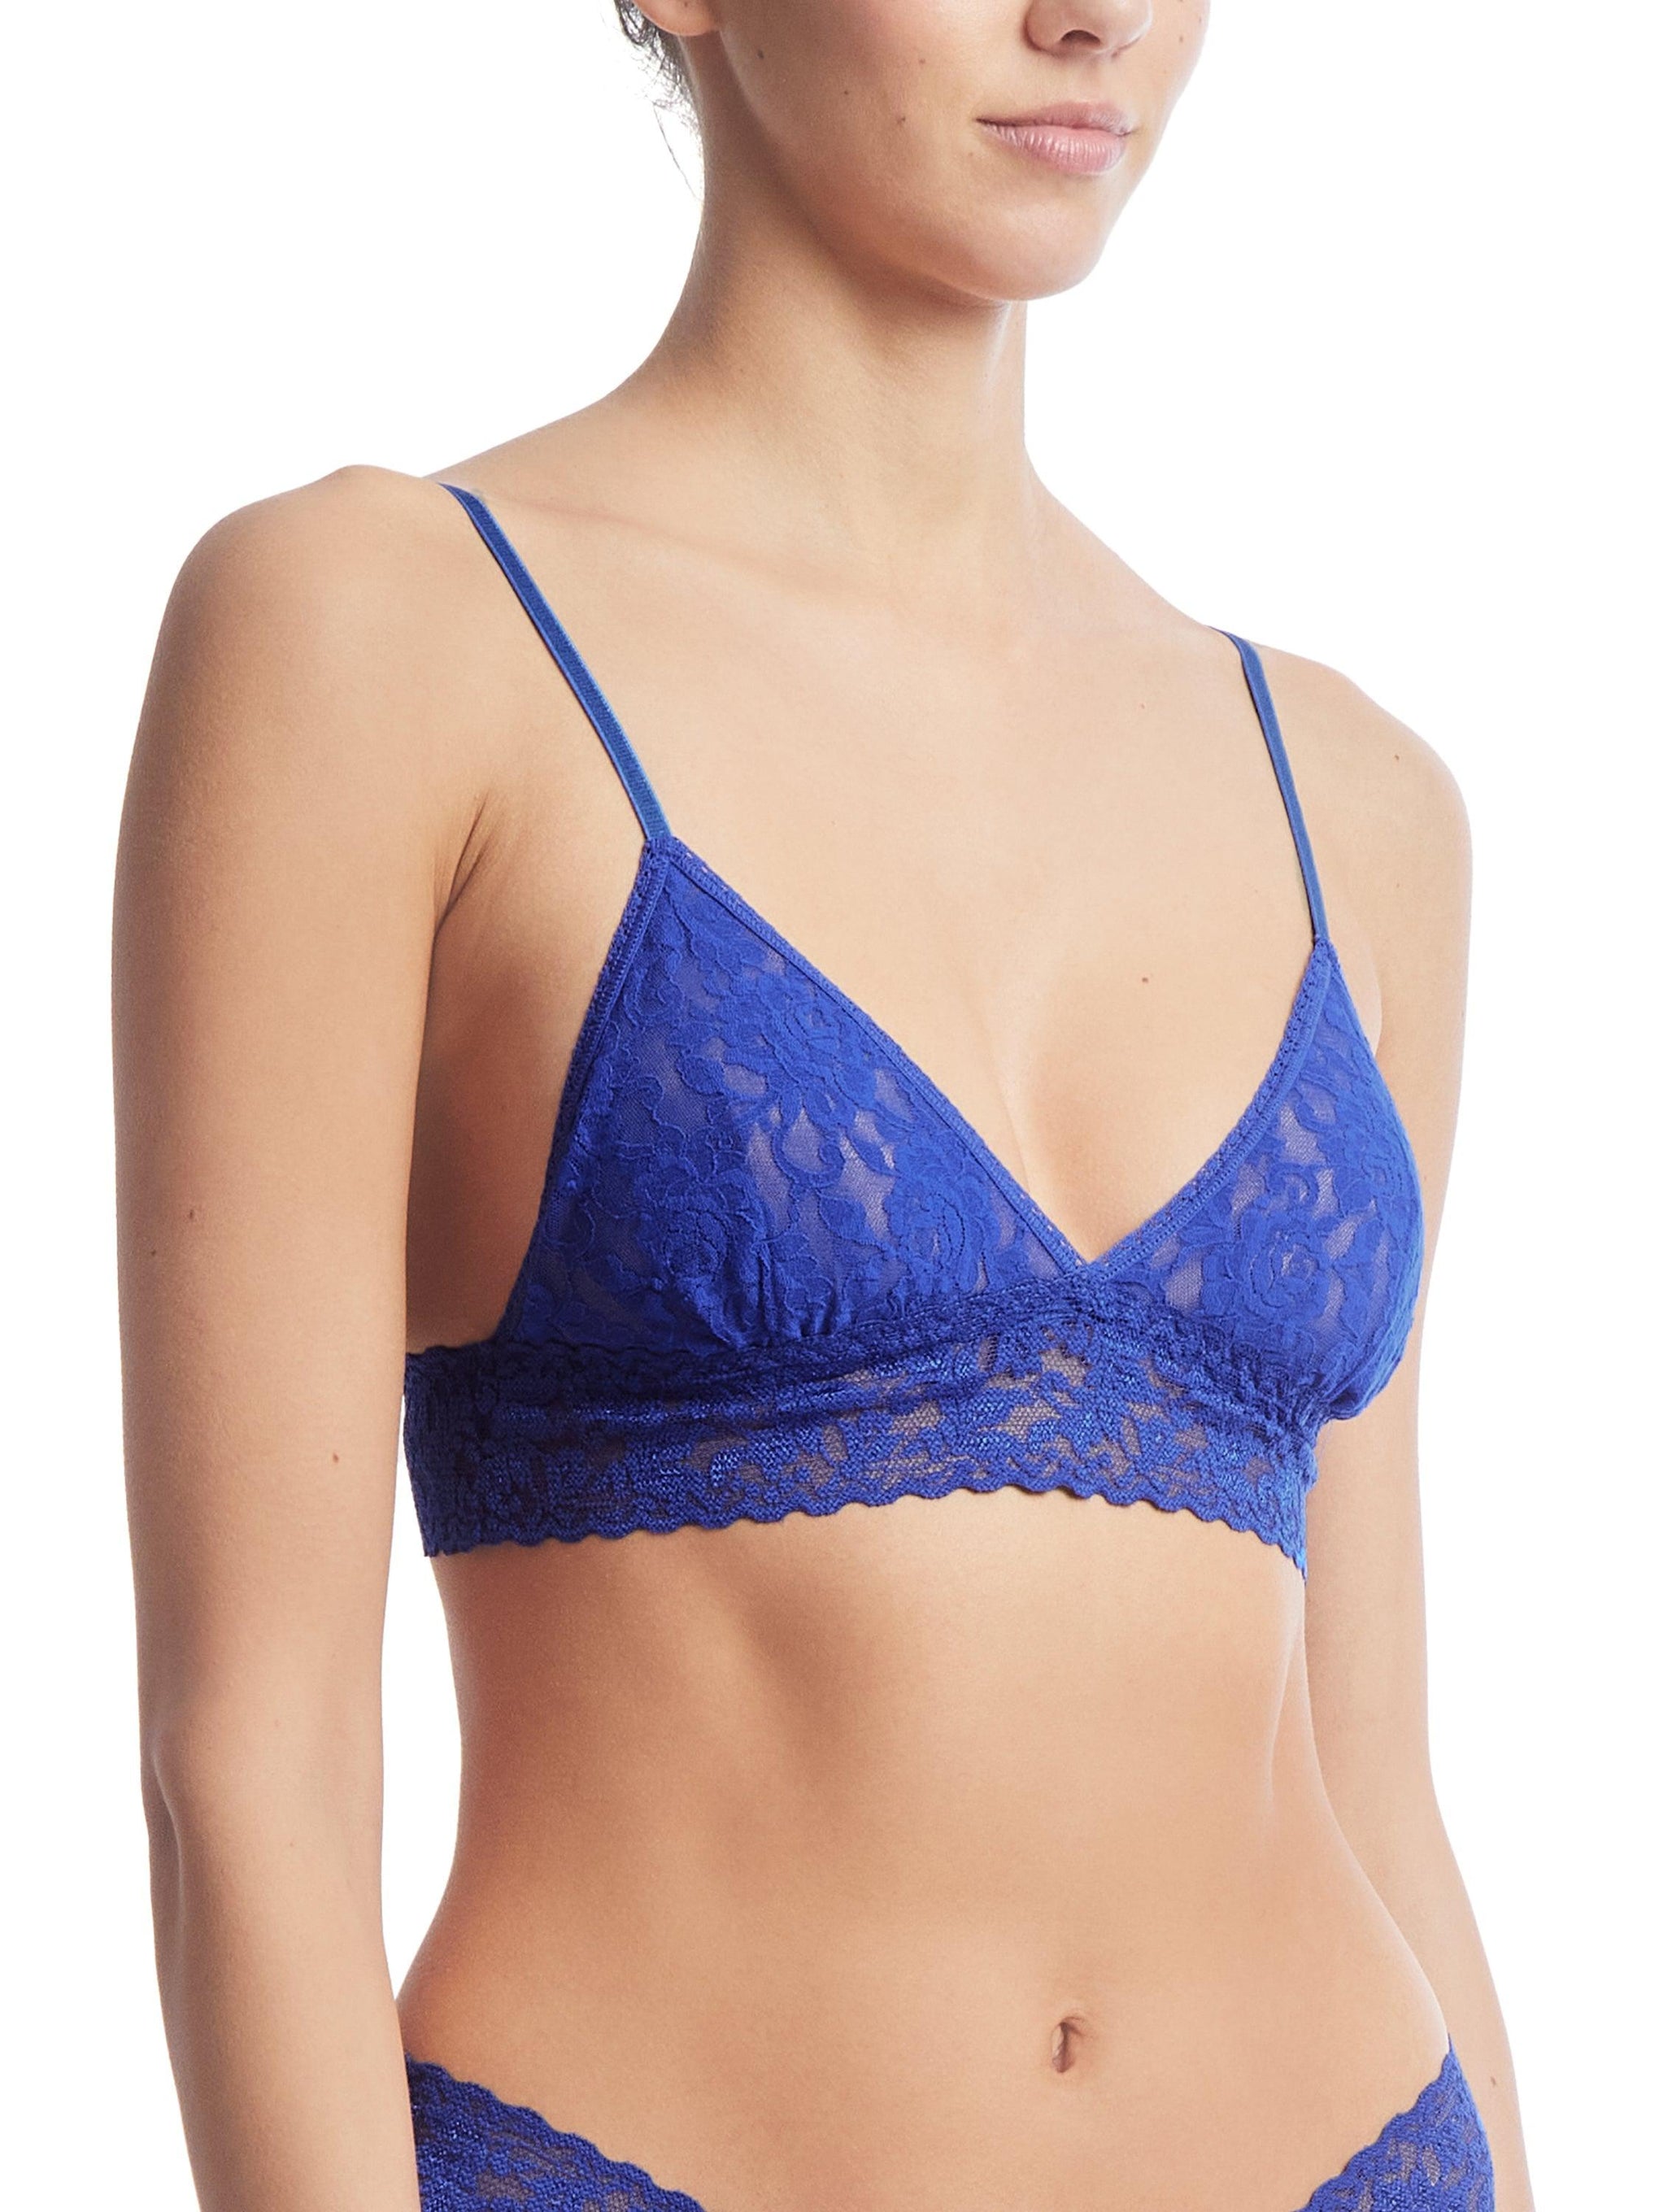 Camisoles & Slips, Royal Blue Netted Bralette Top